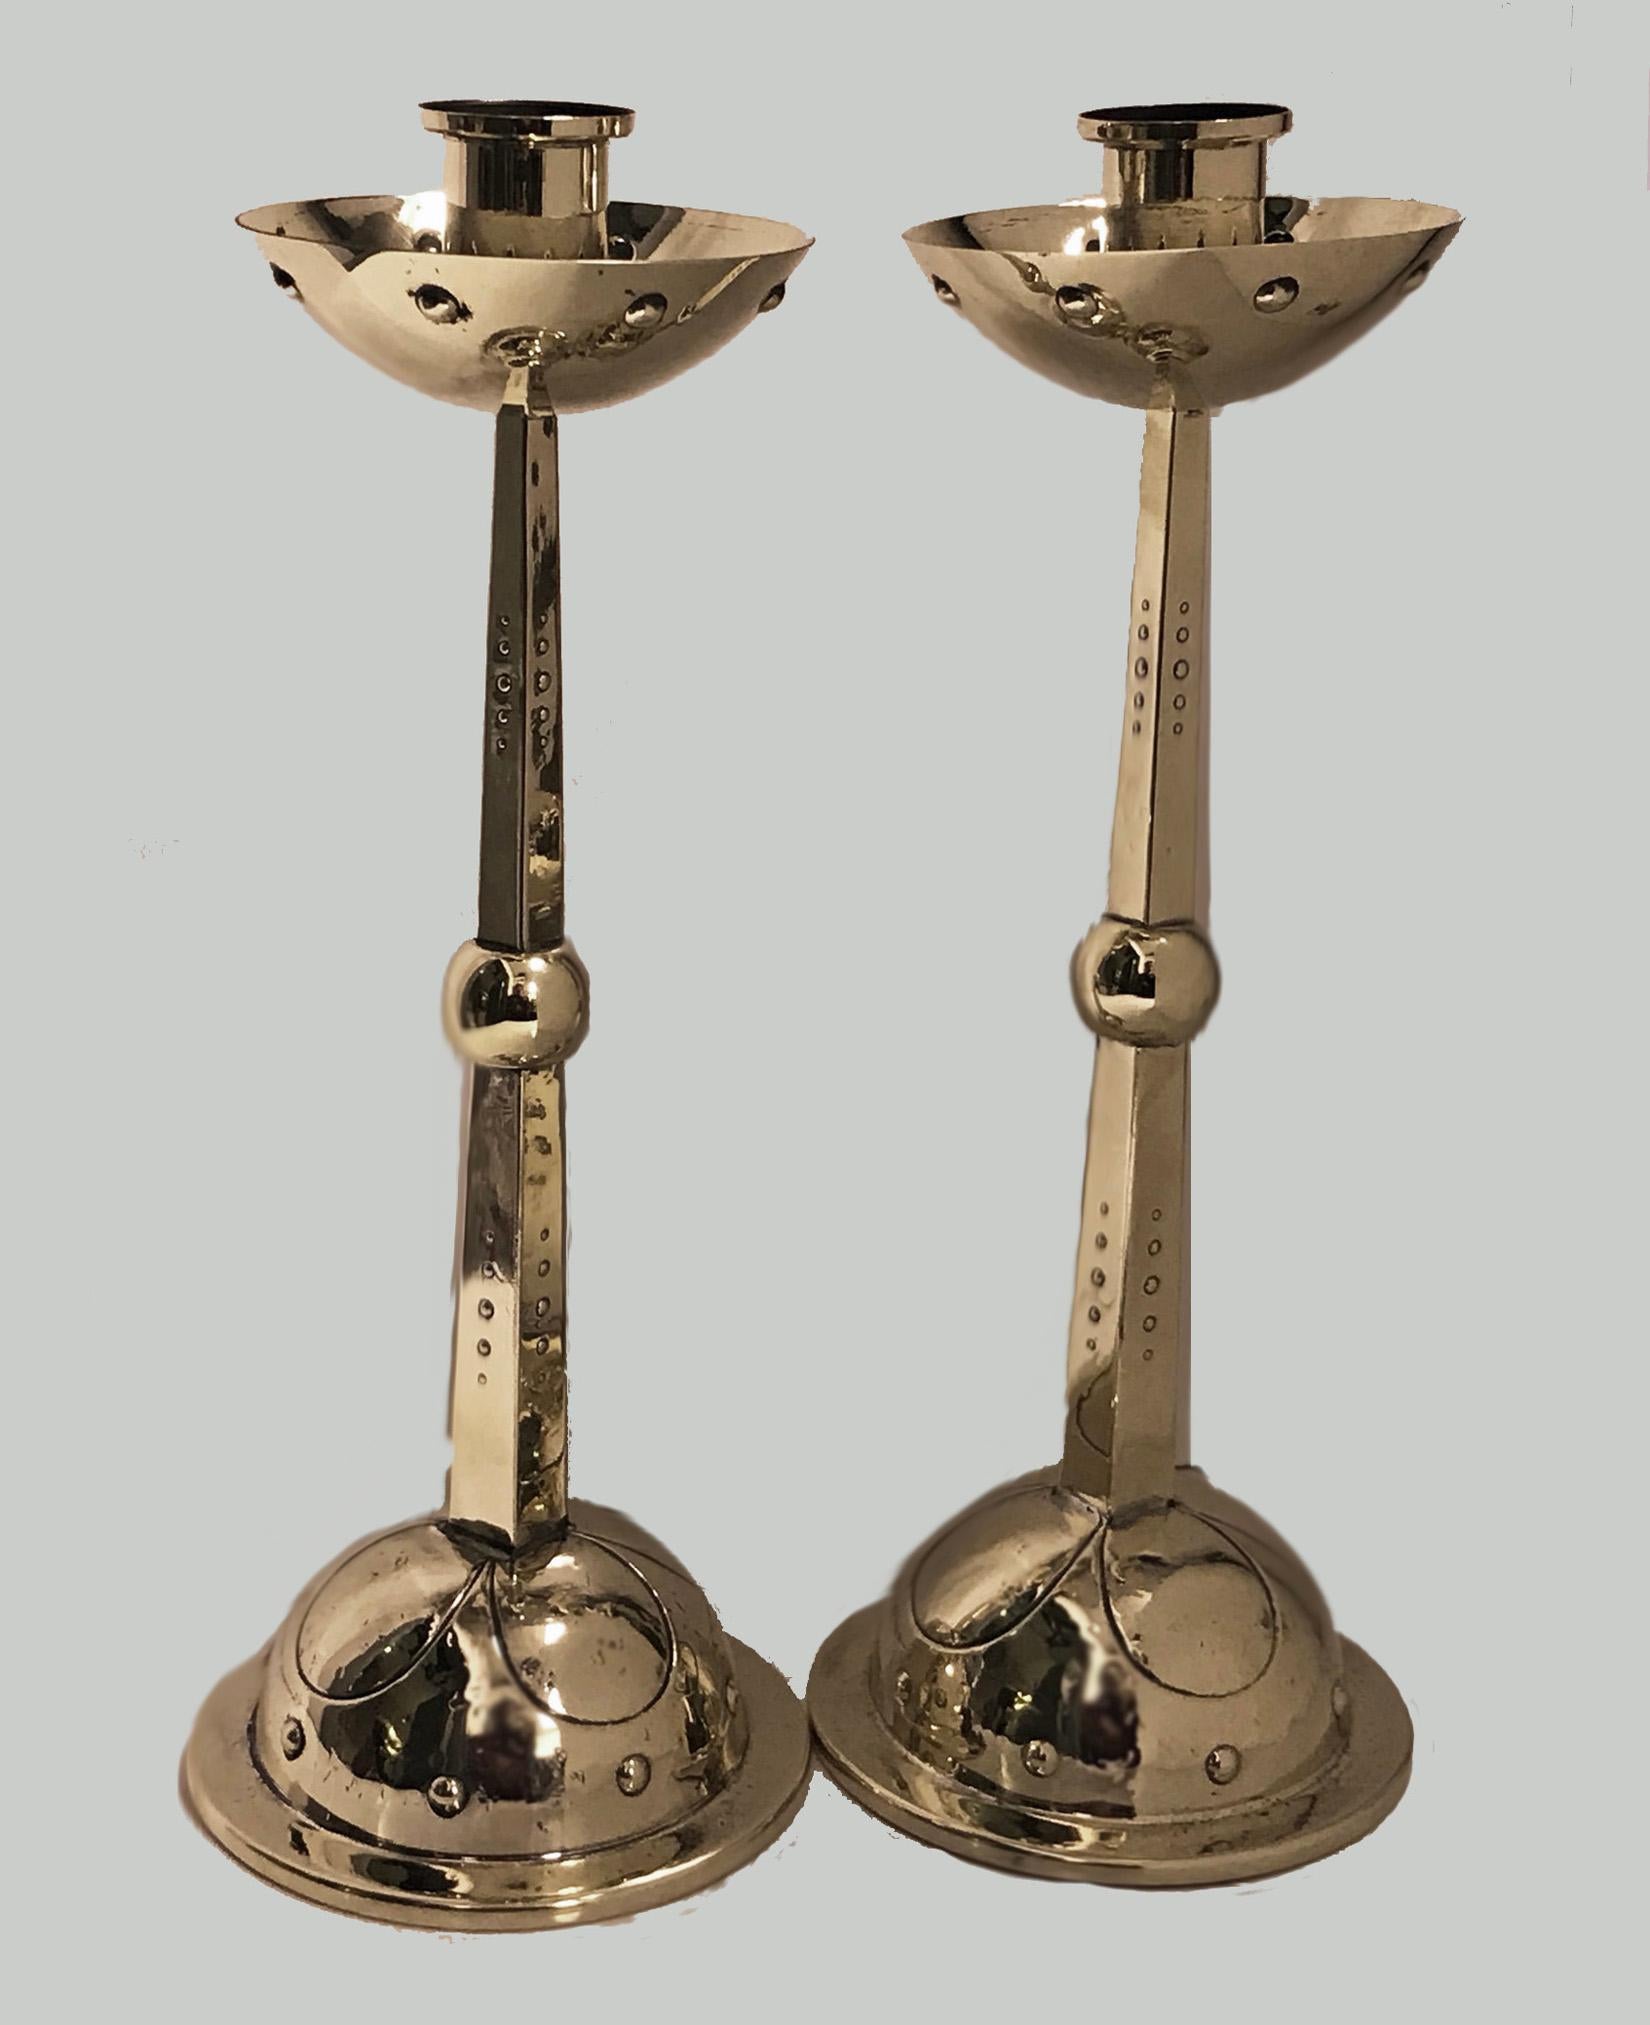 WMF Arts & Crafts Art Nouveau Jugendstil candlesticks, Germany, circa 1900. The brass candlesticks each on dome stylized and rivet surround bases, tapered quadrilateral stems centering a bulbous sphere, the polished nozzle supporting deep well drip